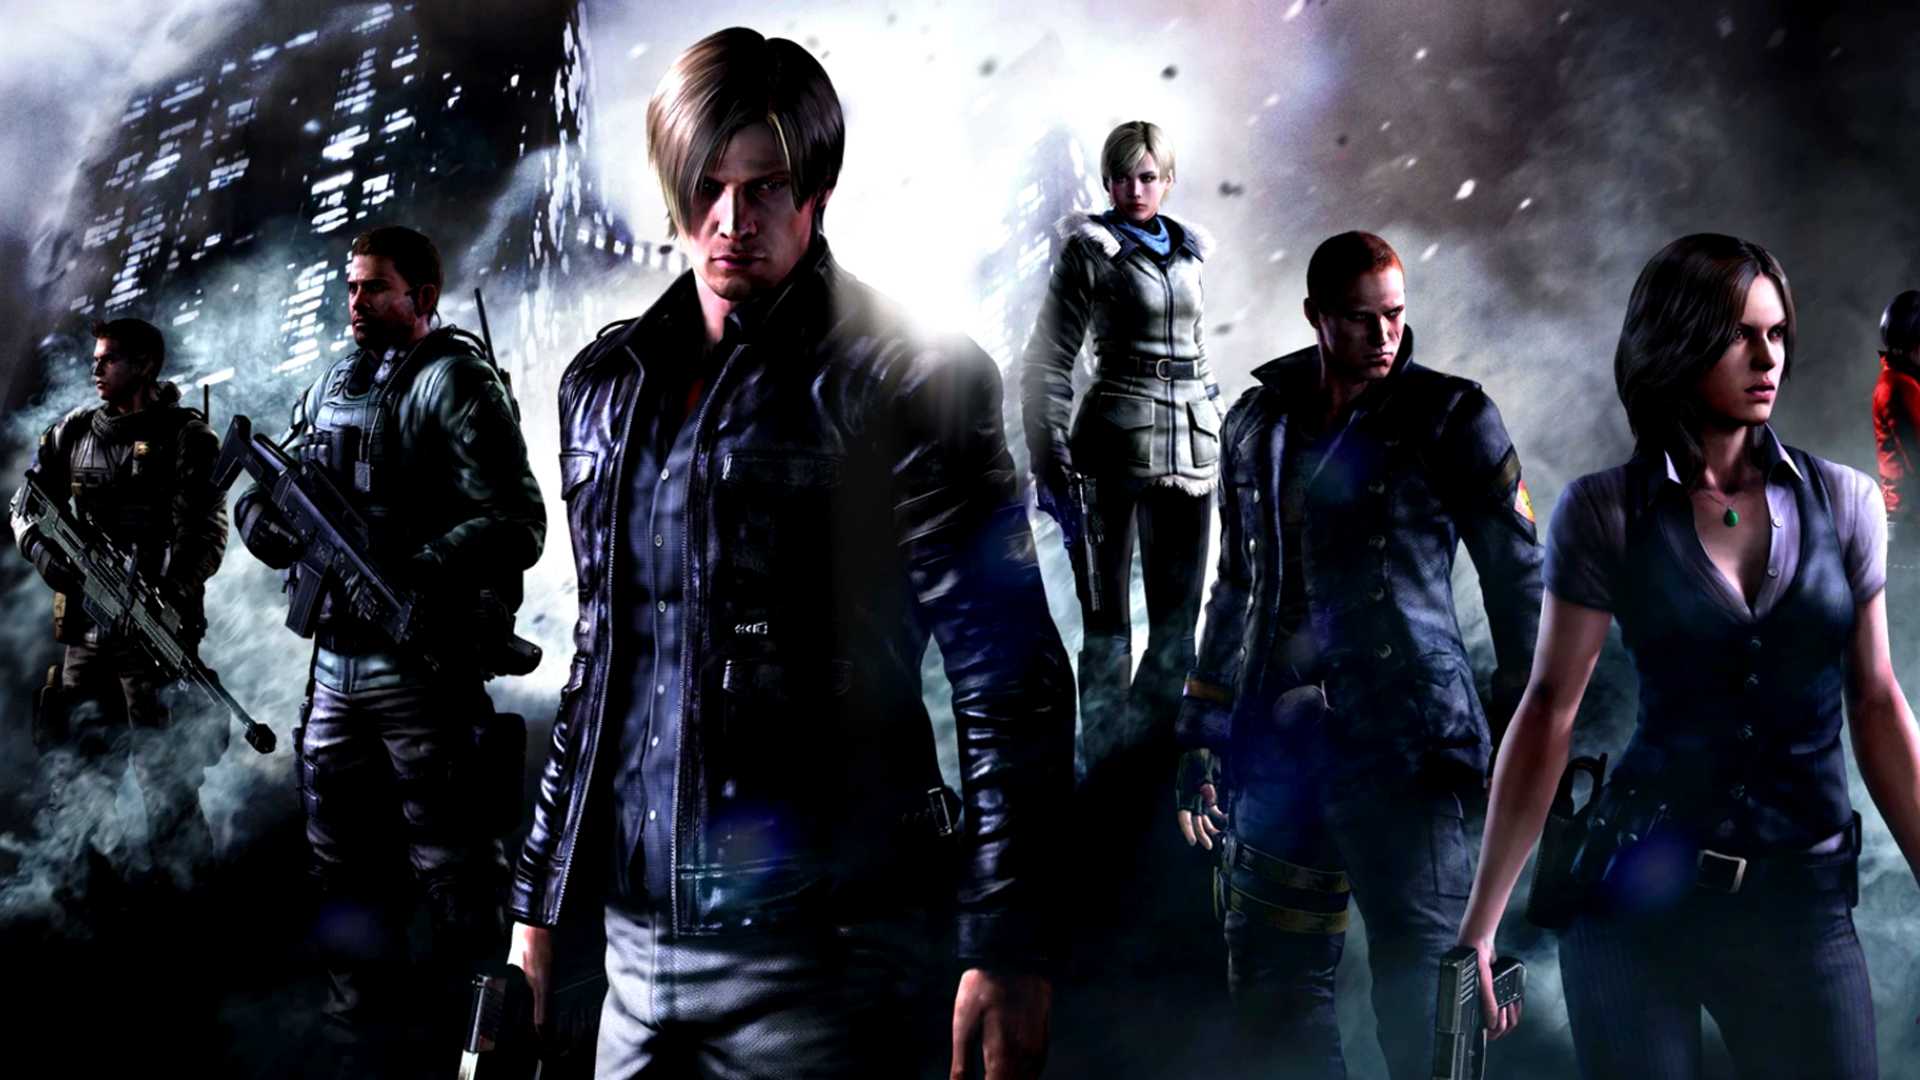 Capcom lowered its expectations after Resident Evil 6's mixed reception